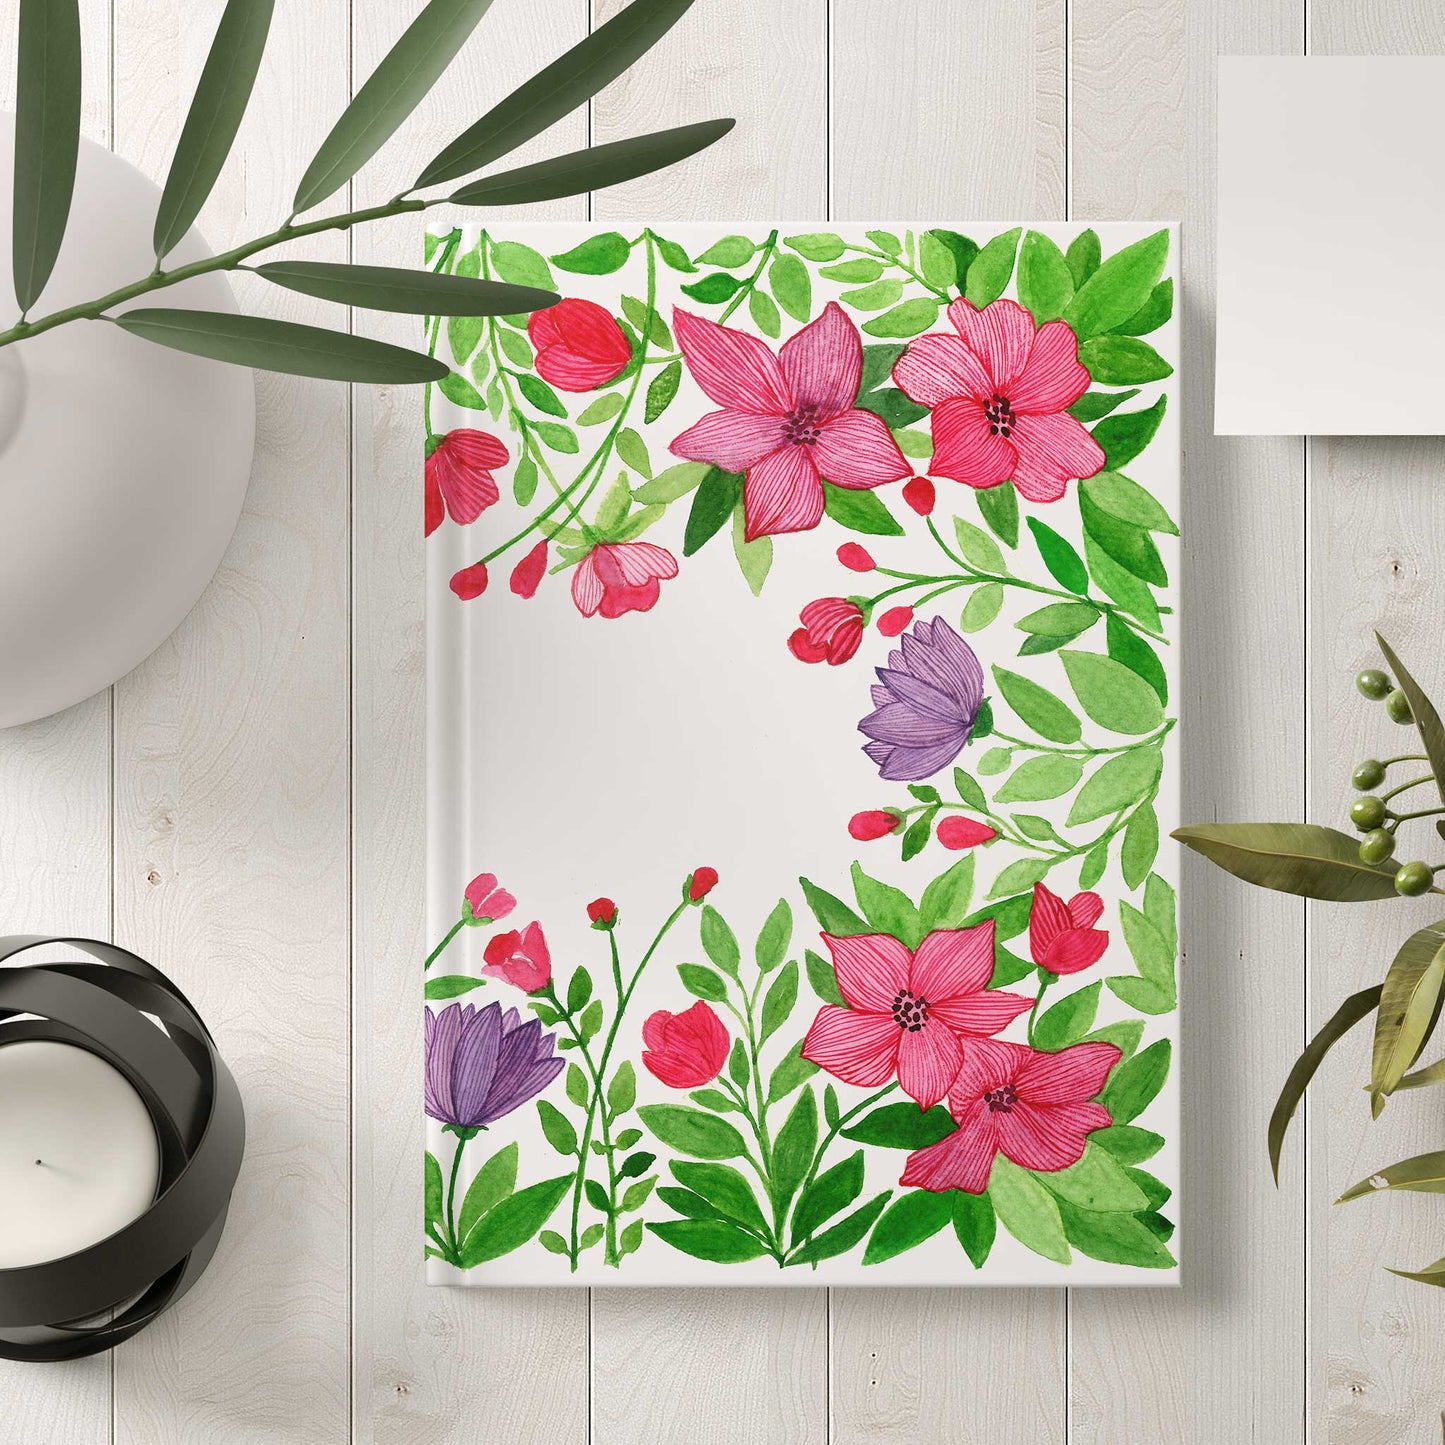 Studio Decorai Stationery 100 Cartridge Pages Valley of Flowers - Notebook